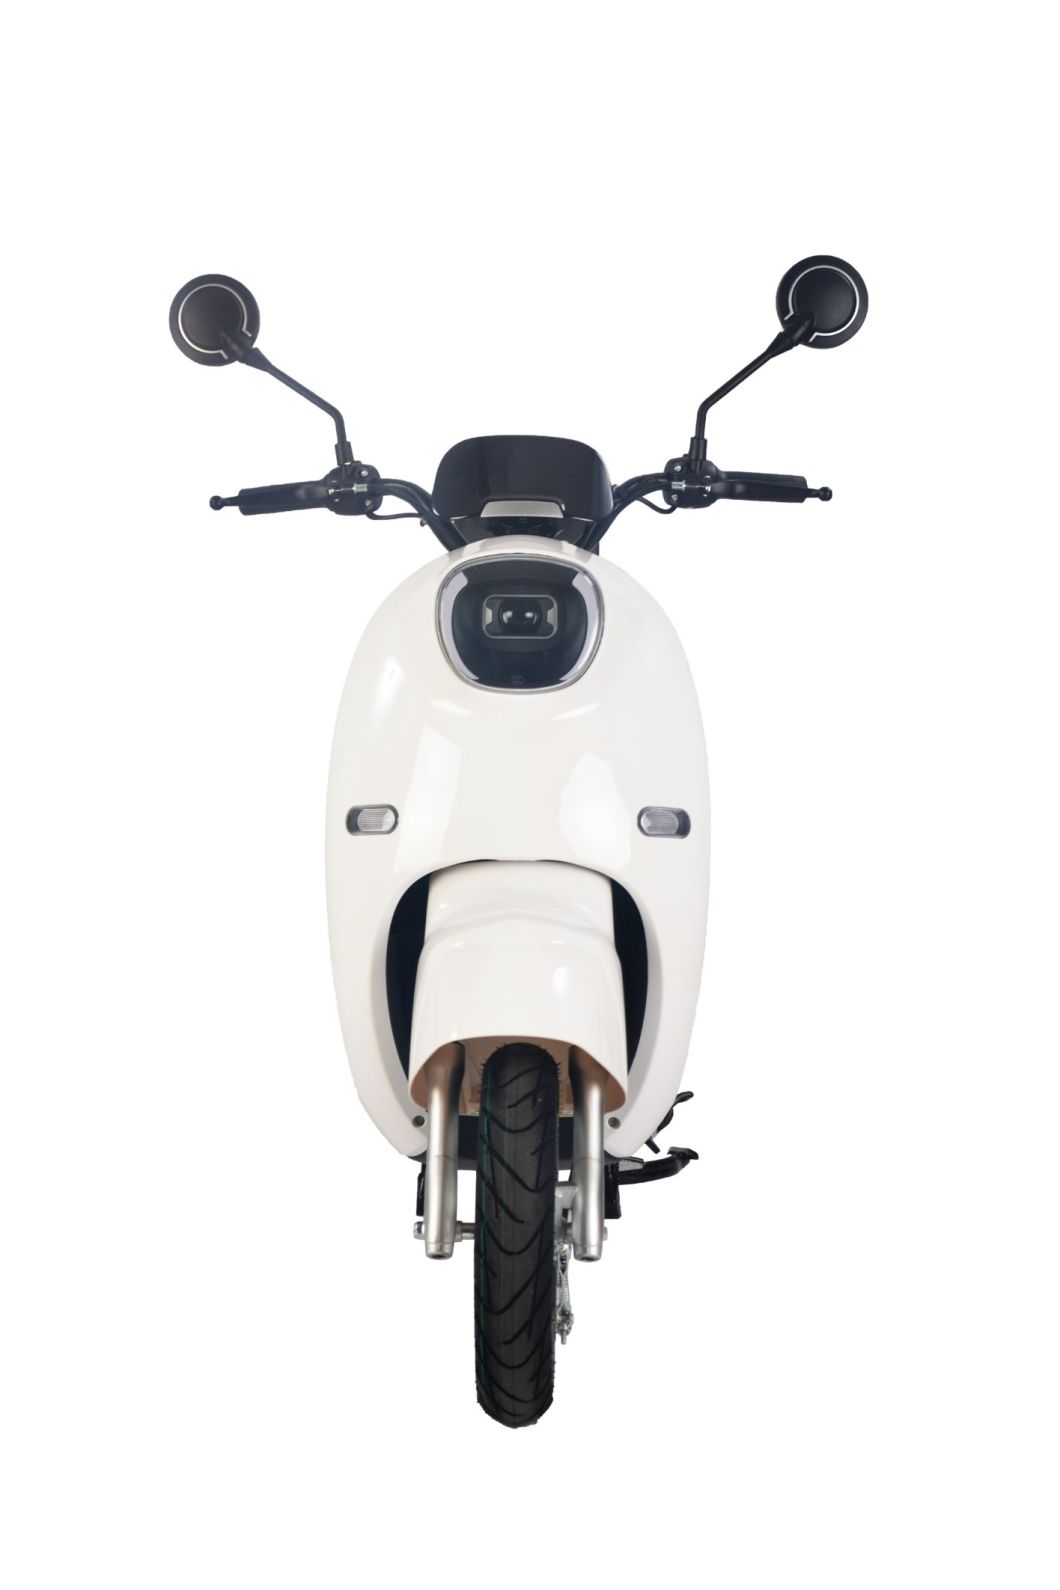 41-60km/H Max Speed Brushless Scooter Adult Electric Bike